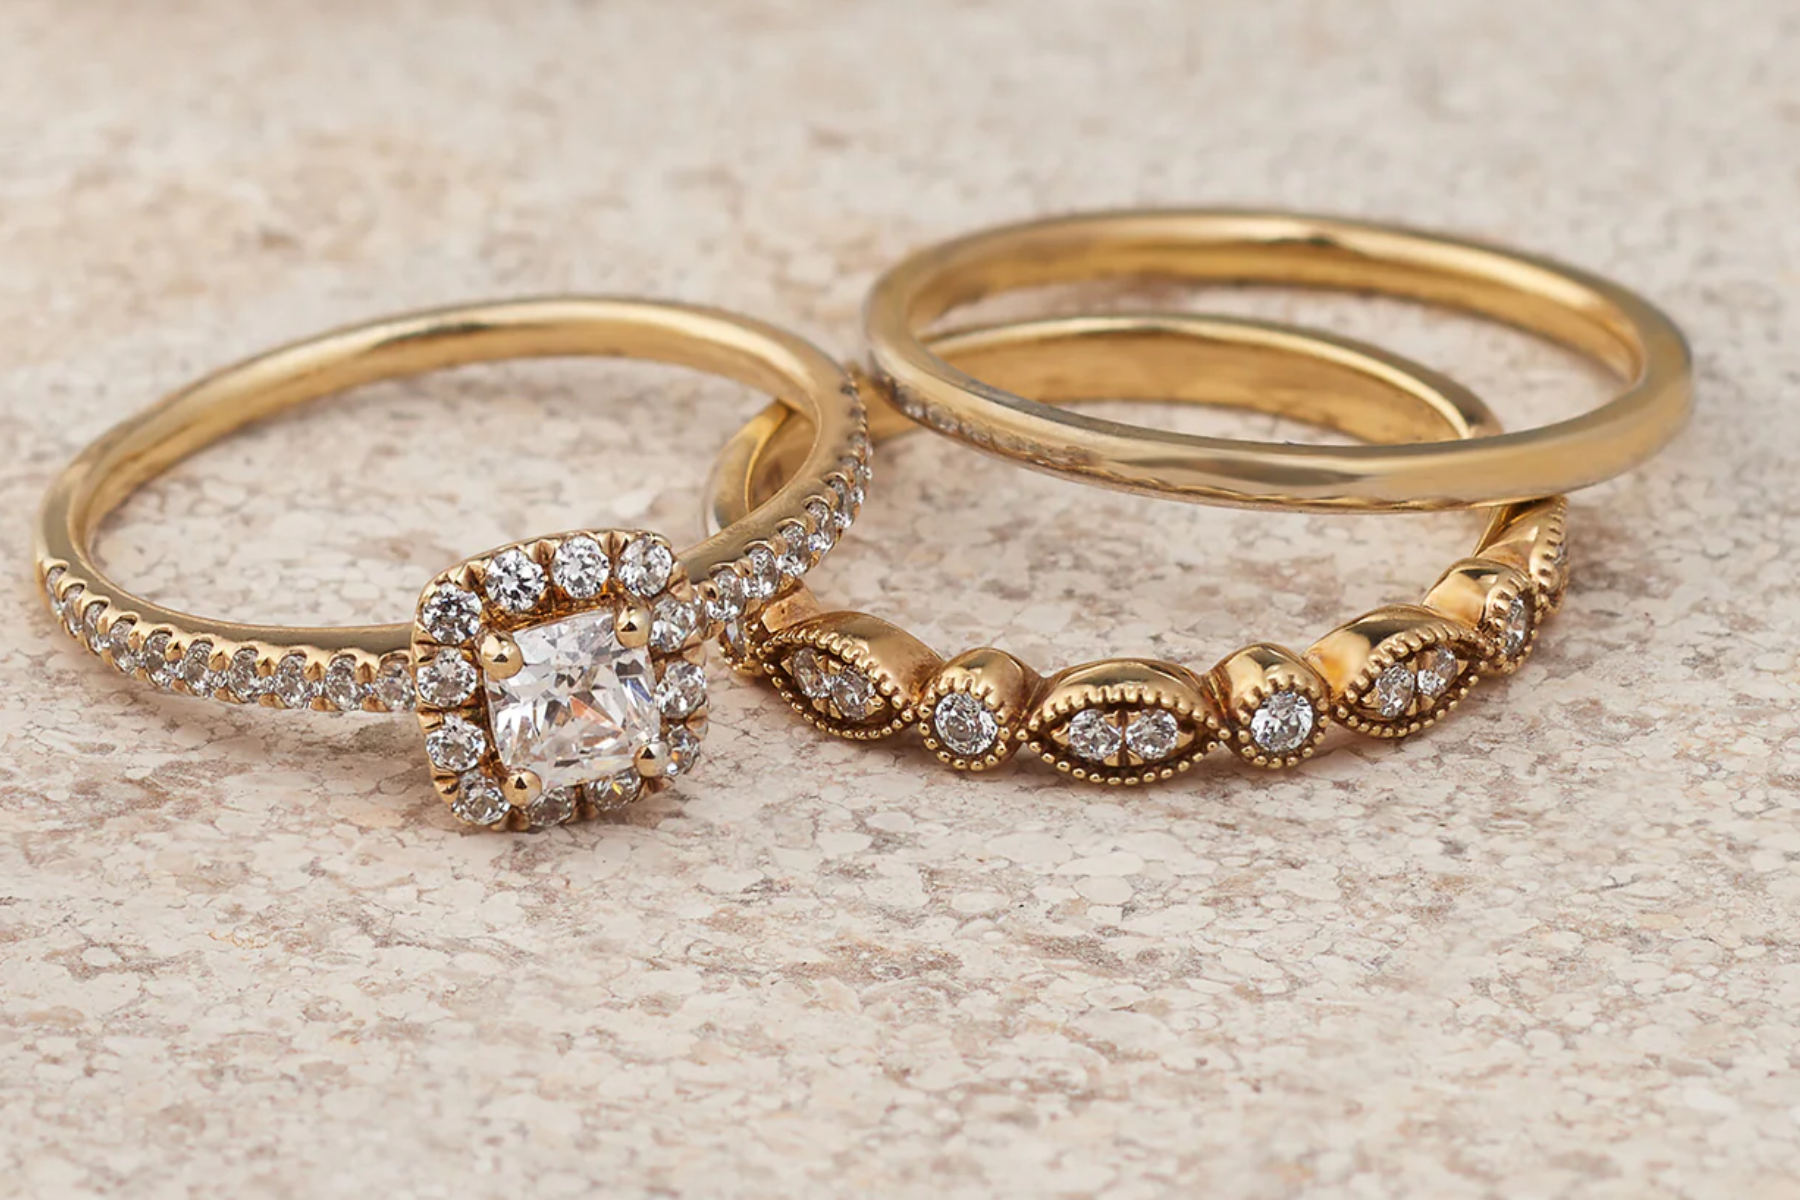 Gold Anniversary Rings - Which One Is Right For You?